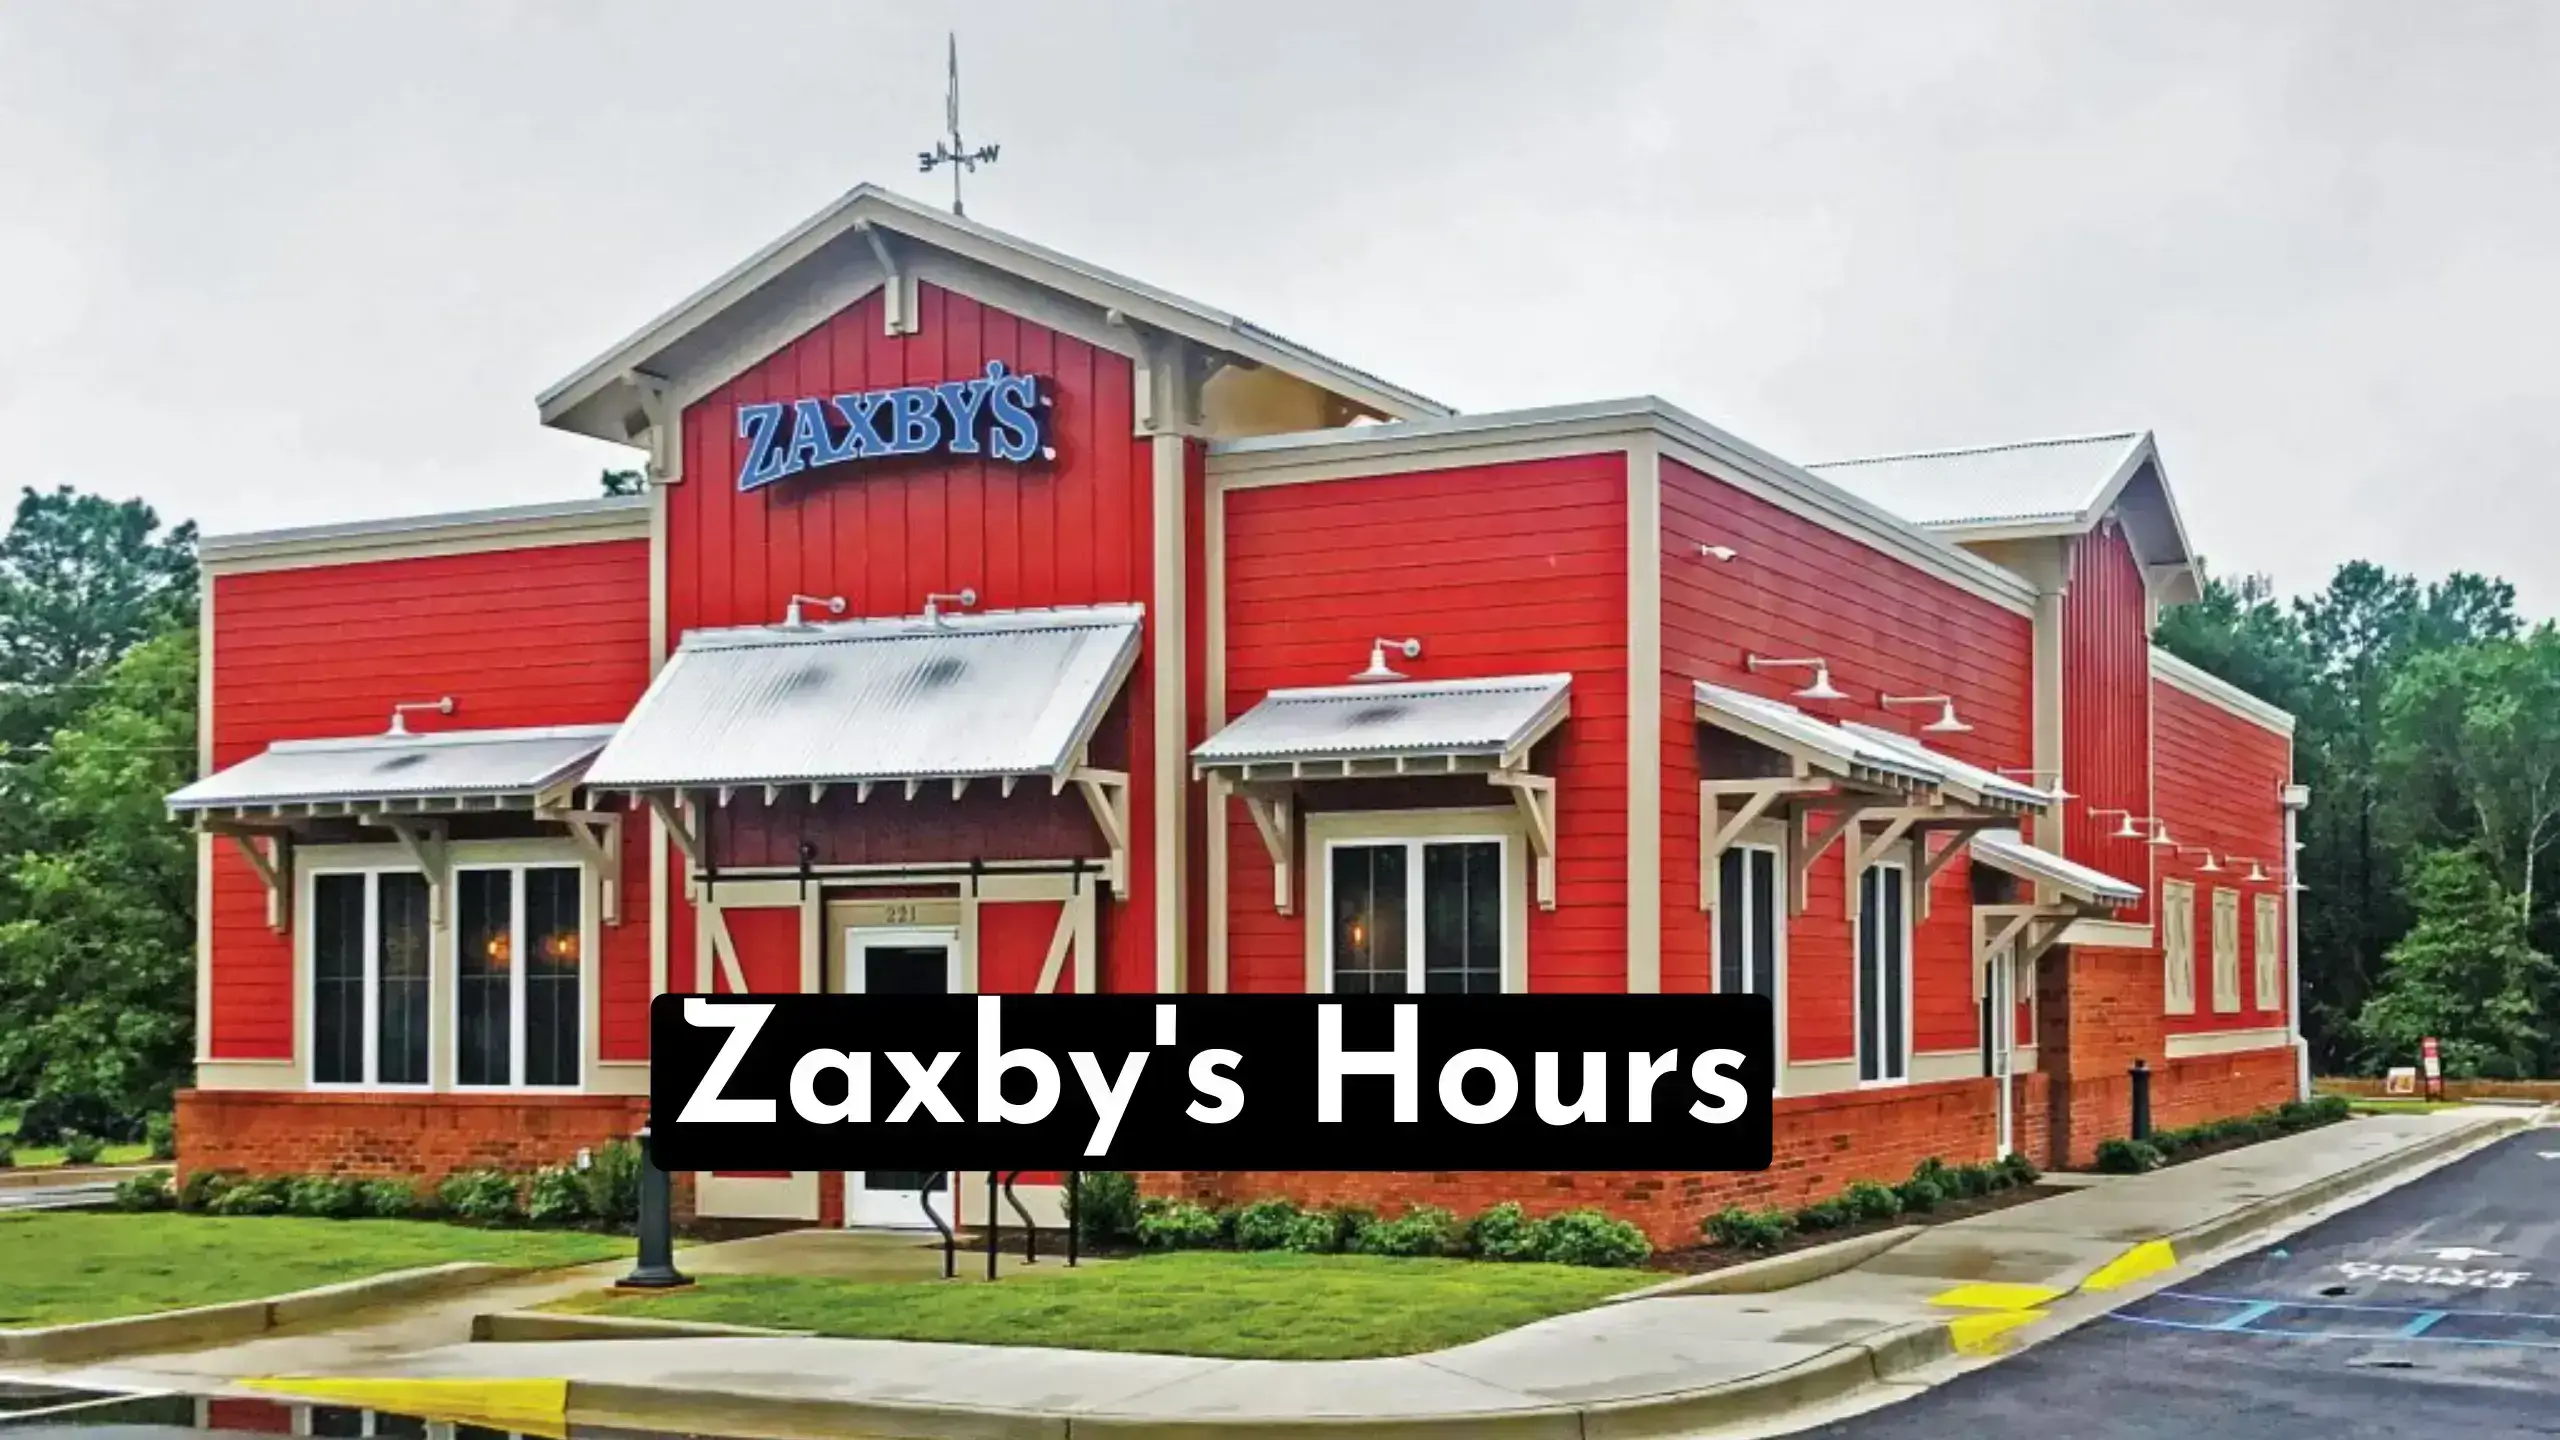 Find a Zaxby's hours and closest Zaxby's near me locations. Also Discover Zaxby's menu prices and Zaxby's Reviews and ratings.